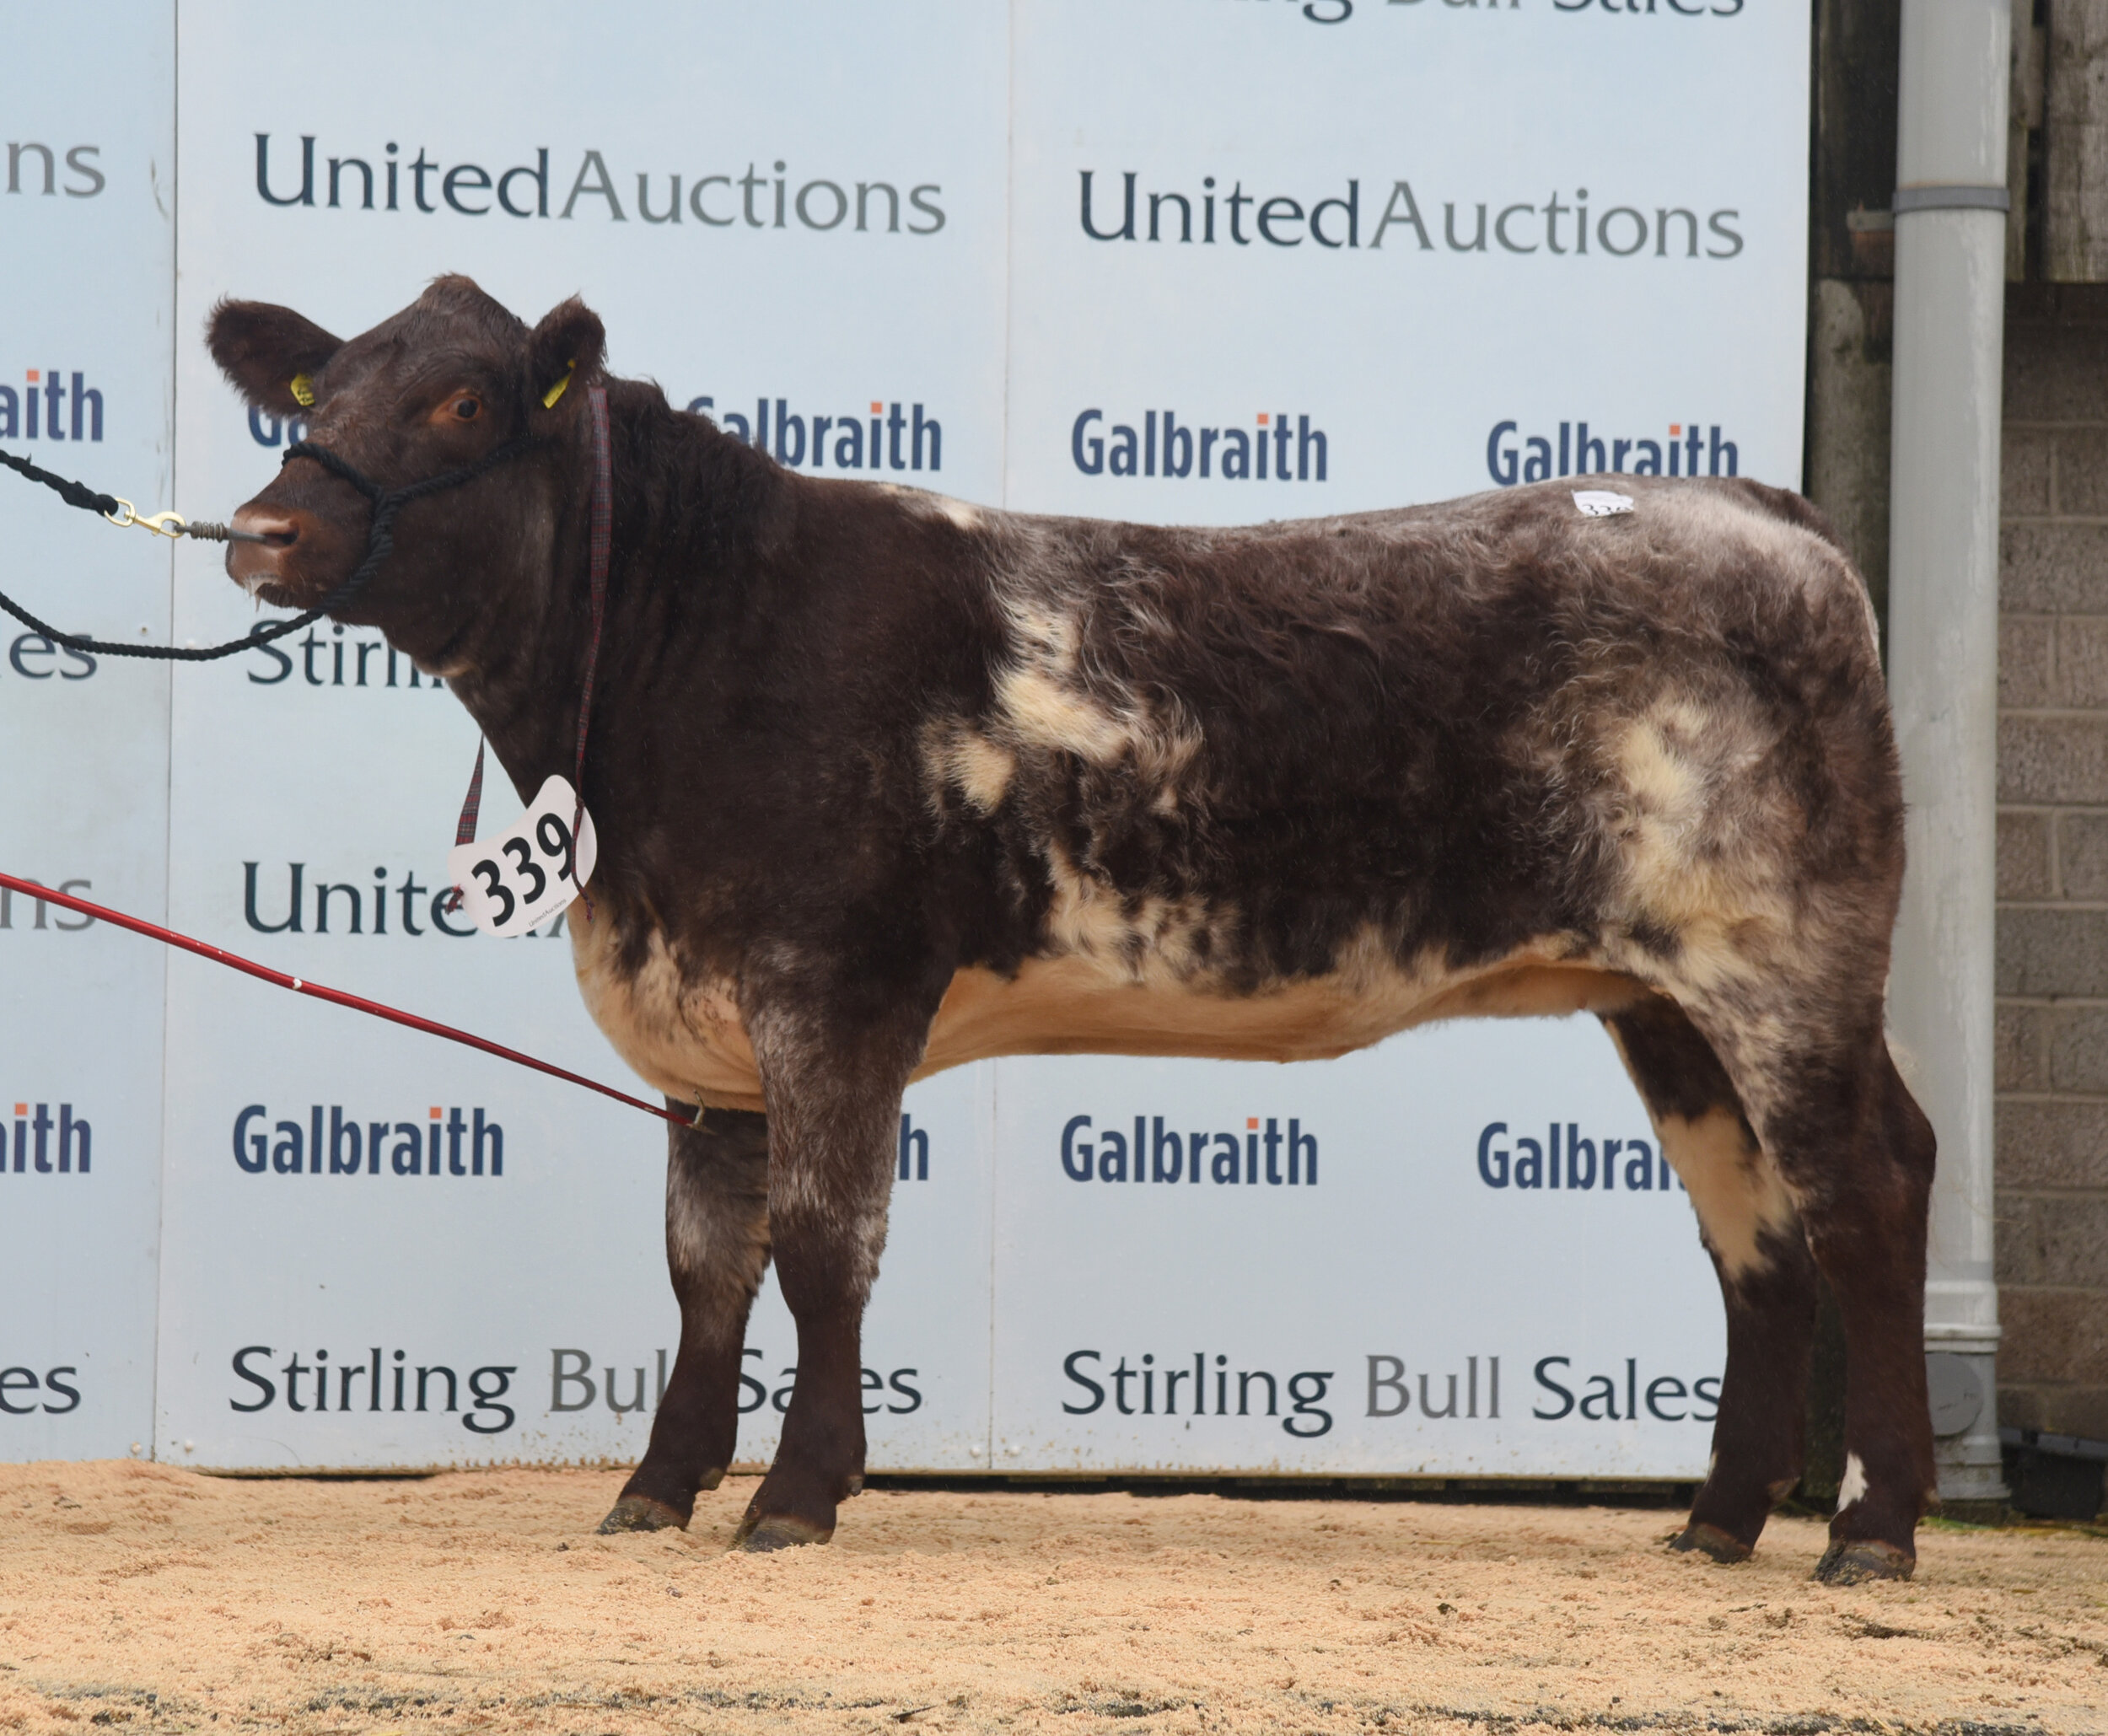 Meonside Foxglove Tansy P59 sold for 4,800 gns at Stirling October 2021 Bull Sales